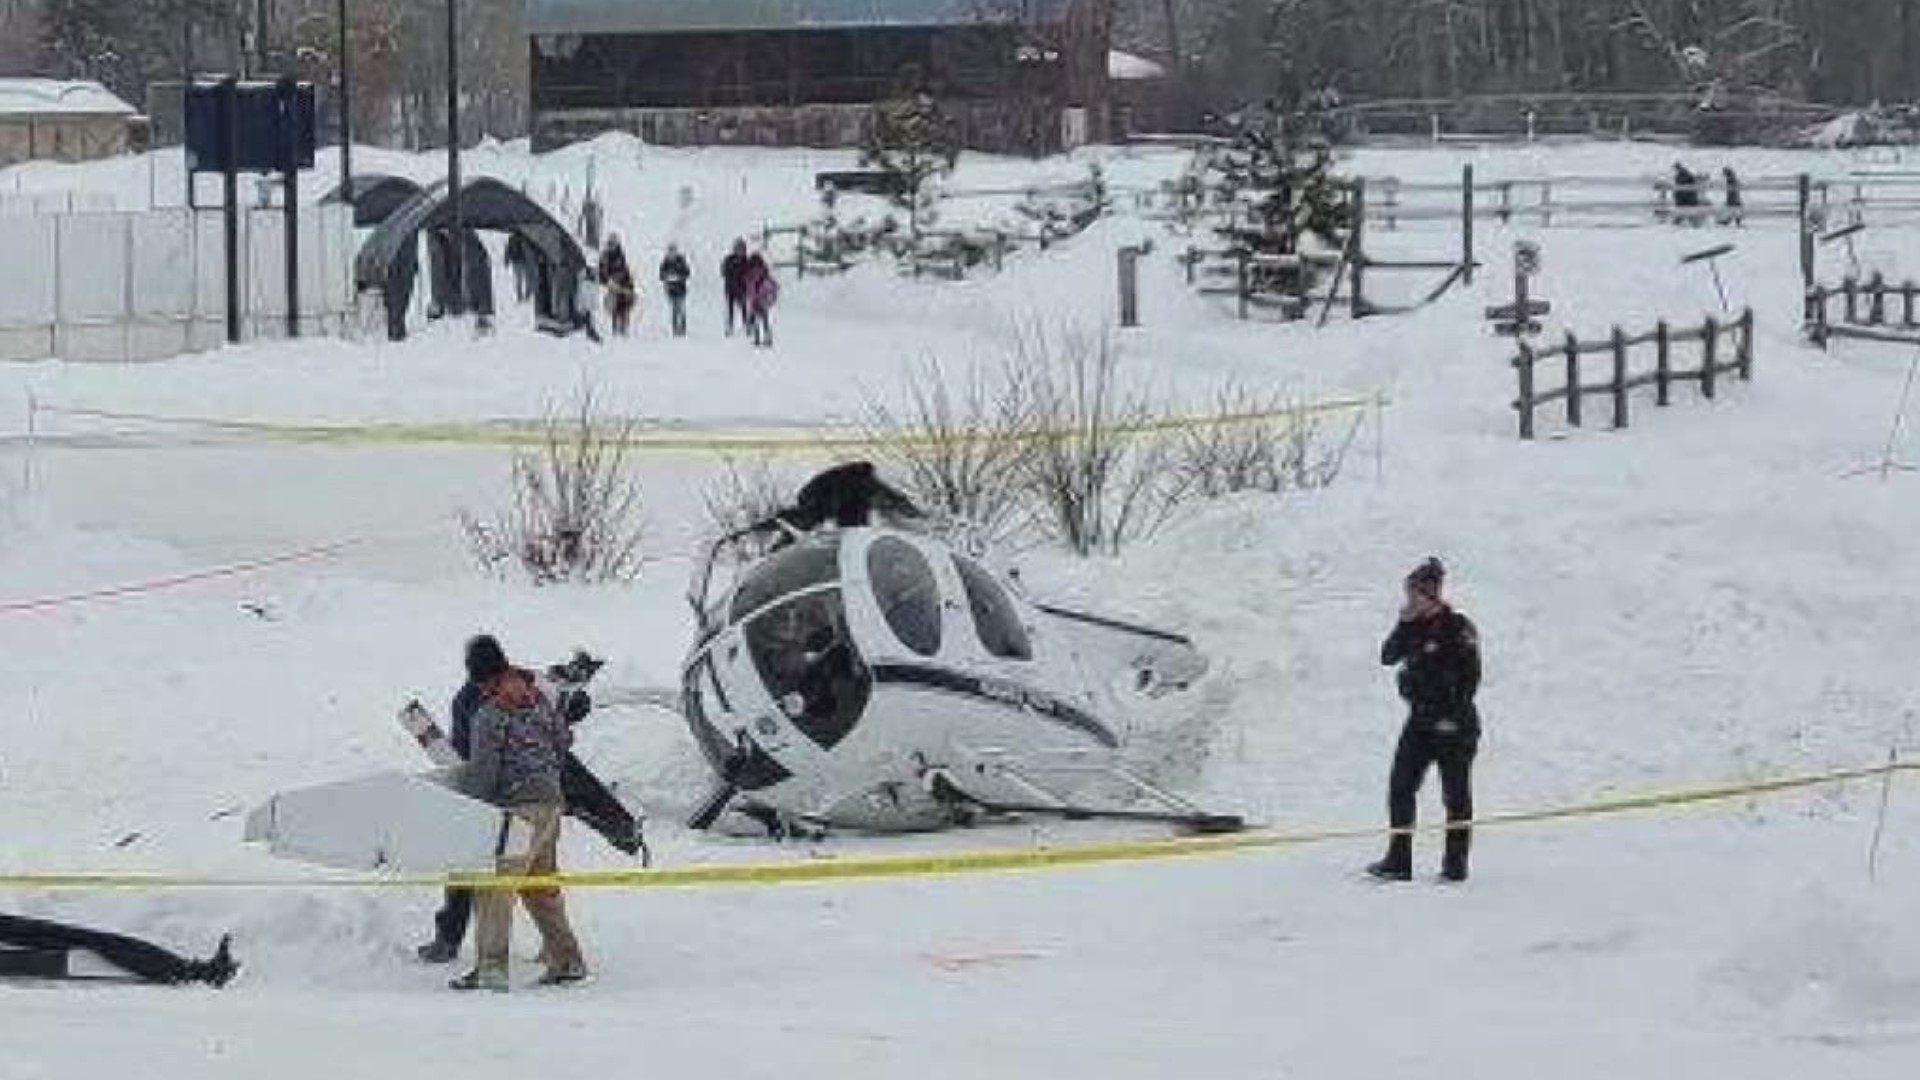 The helicopter landed hard close to an outdoor ice rink in Winthrop on Saturday. Kids had just been on the ice. No one was injured.